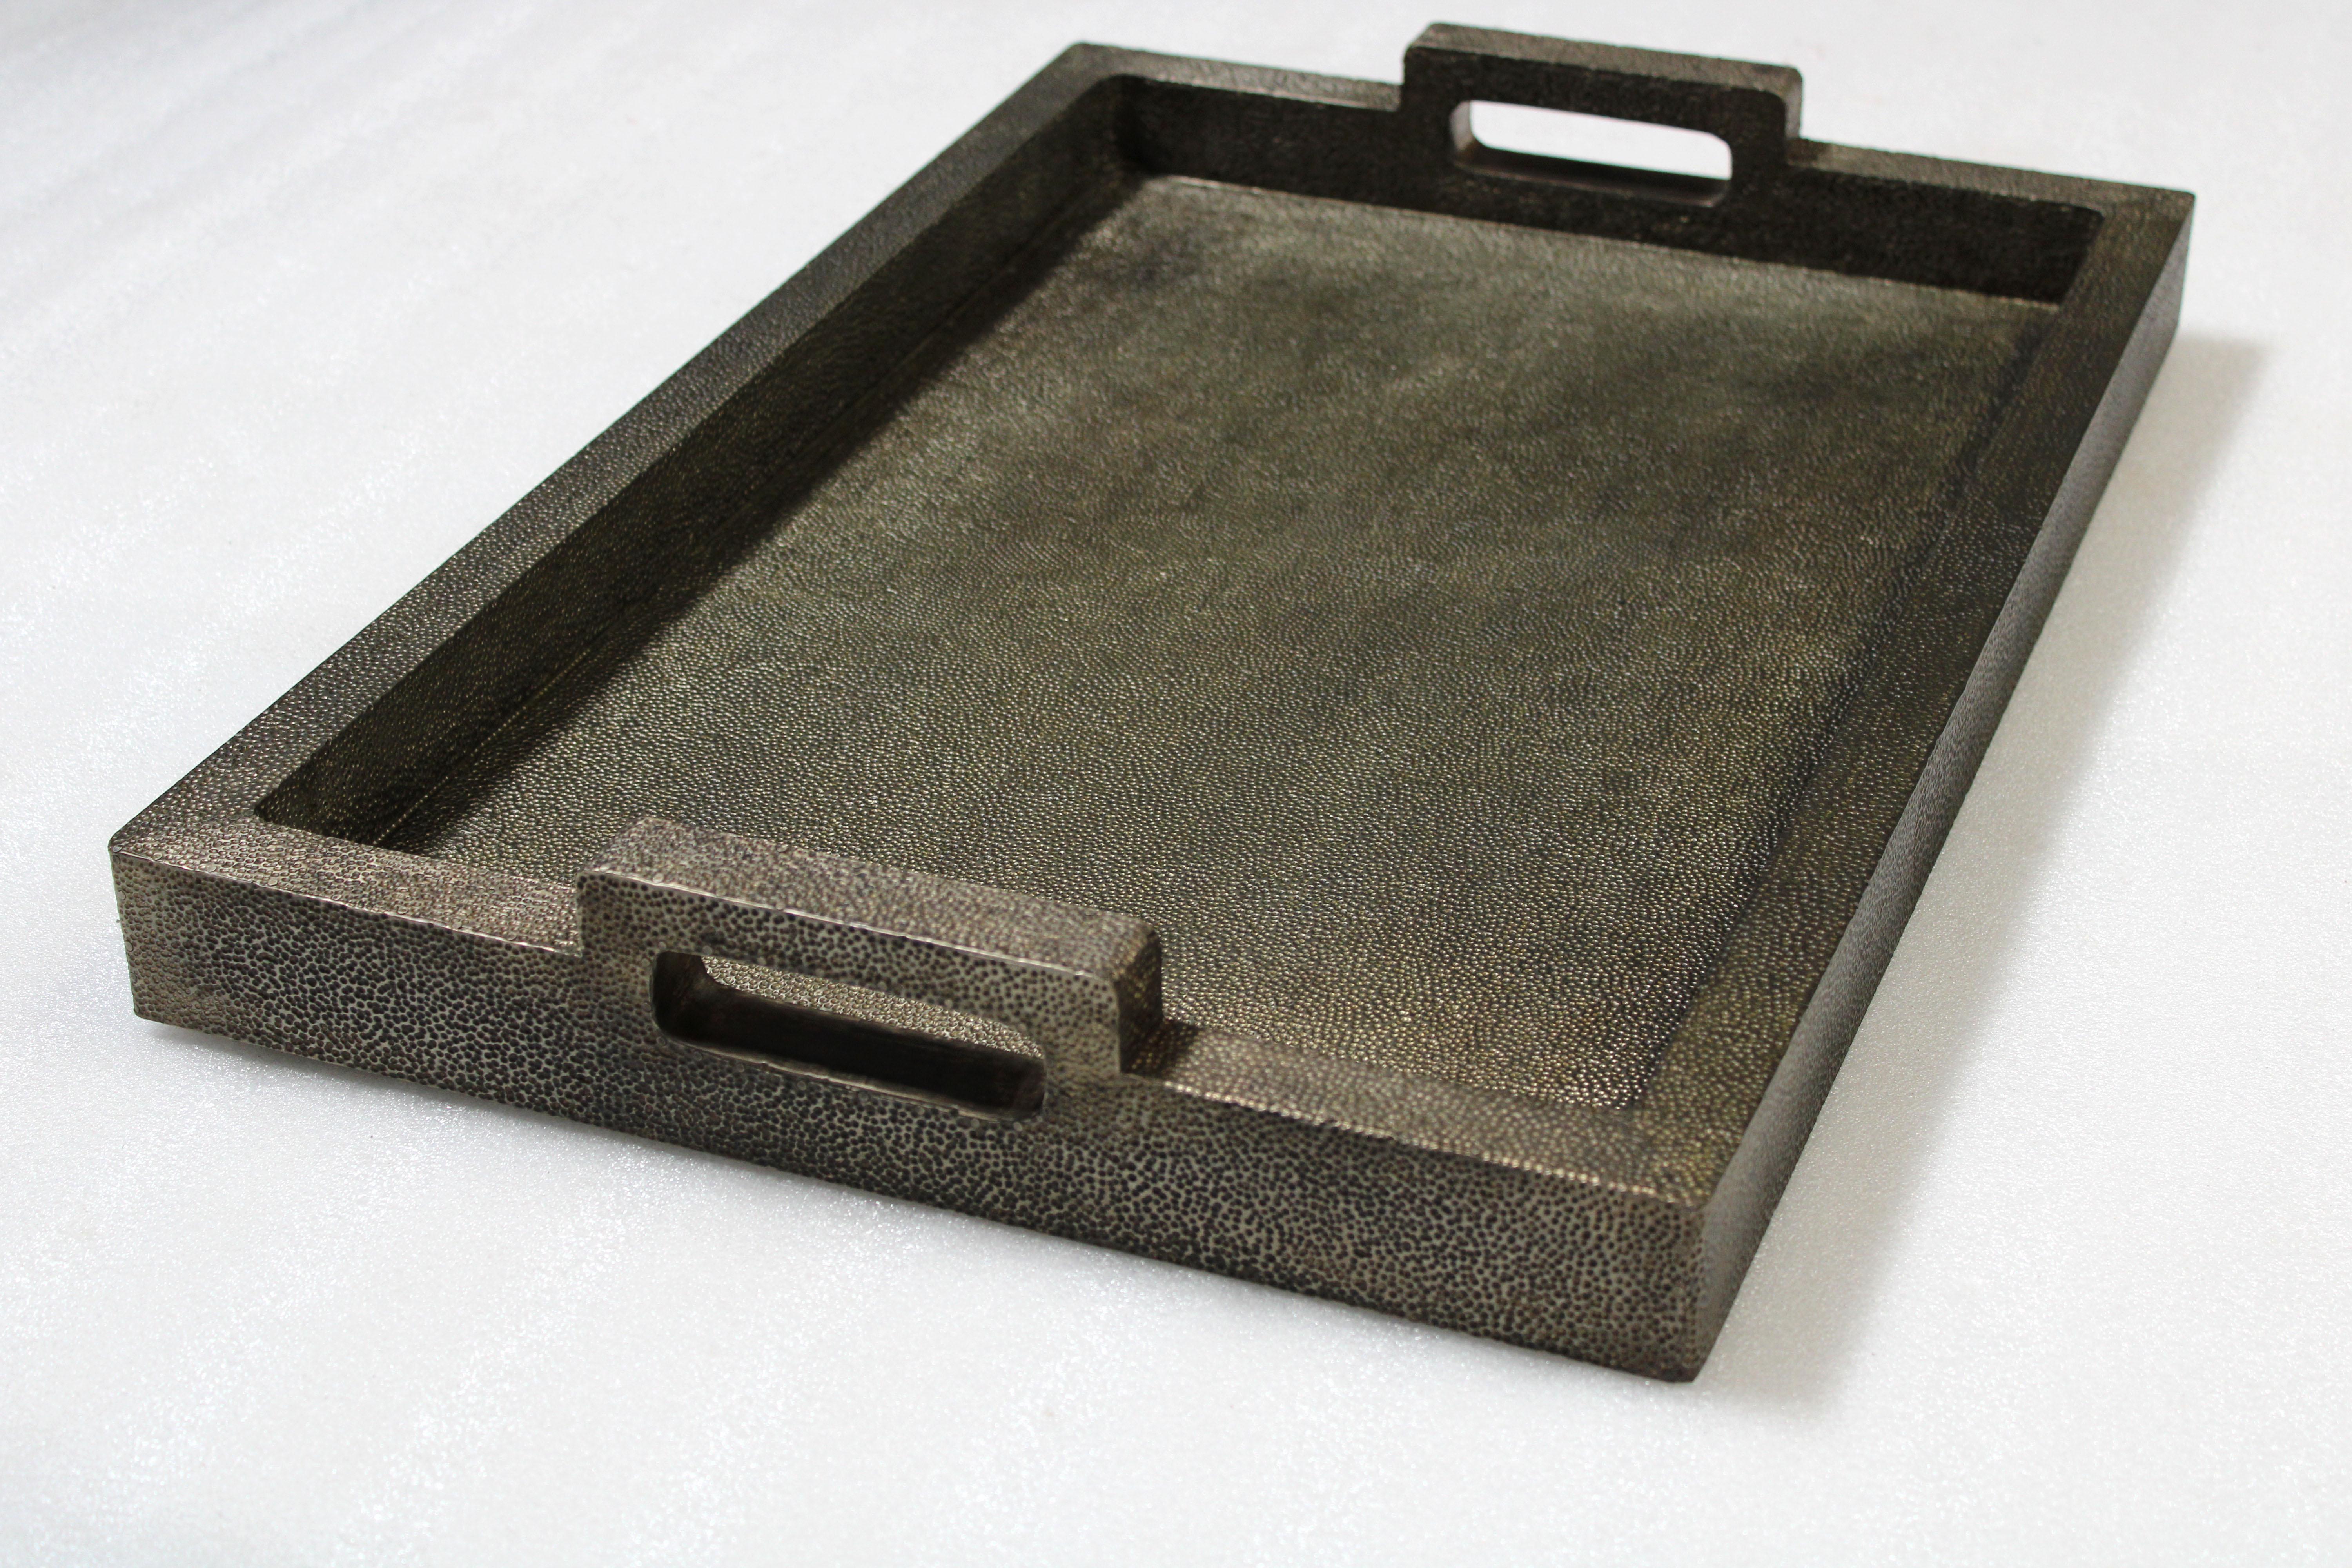 American Rectangular Metal Tray in Antique Bronze Clad Over MDF by Stephanie Odegard For Sale